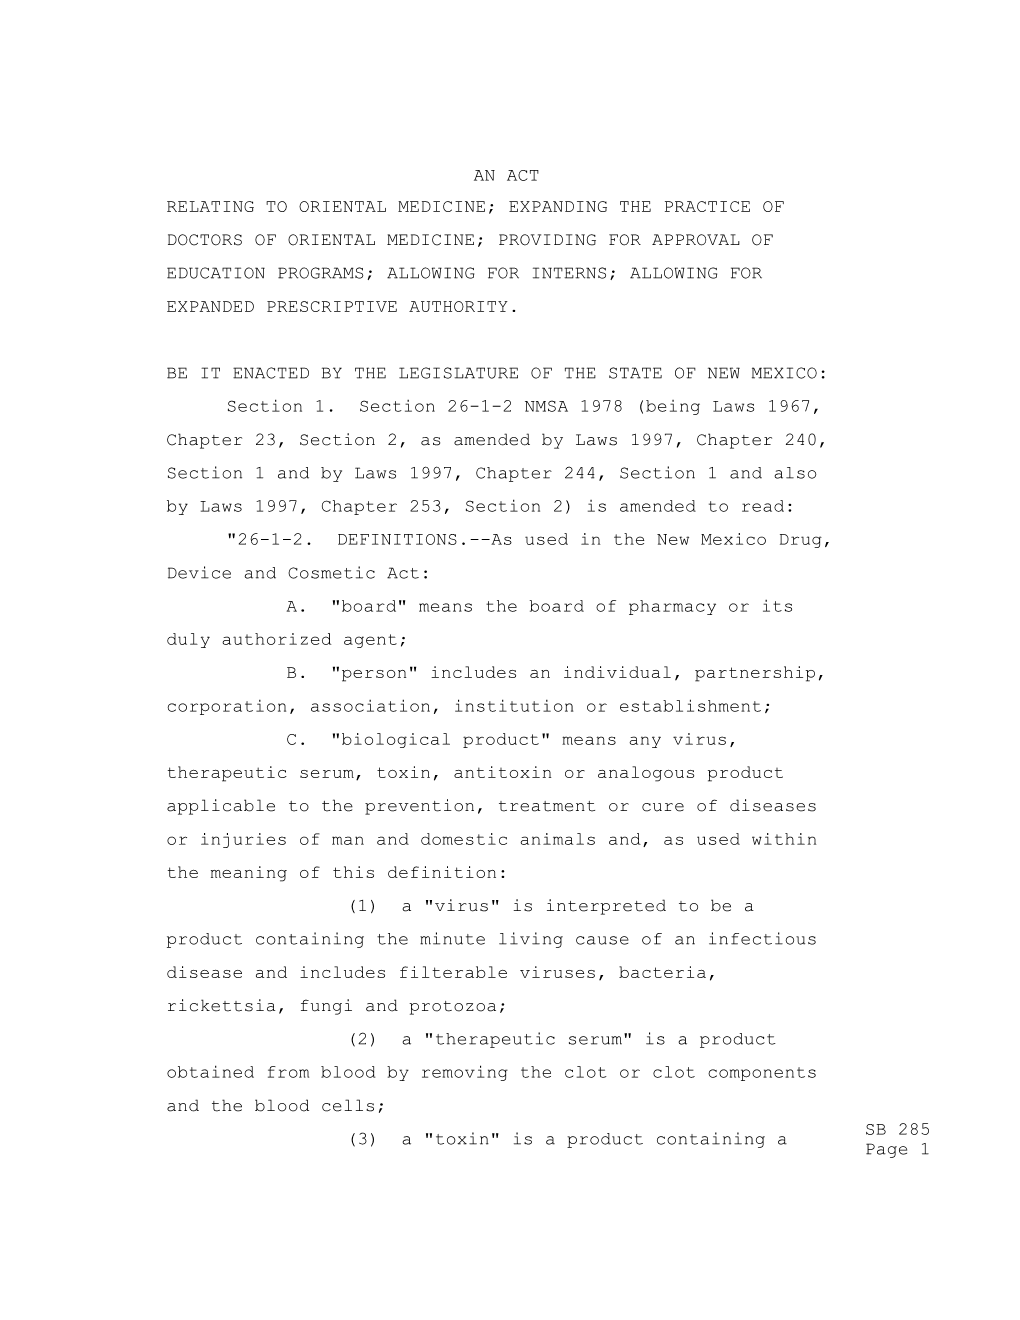 SB 285 Page 1 an ACT RELATING TO